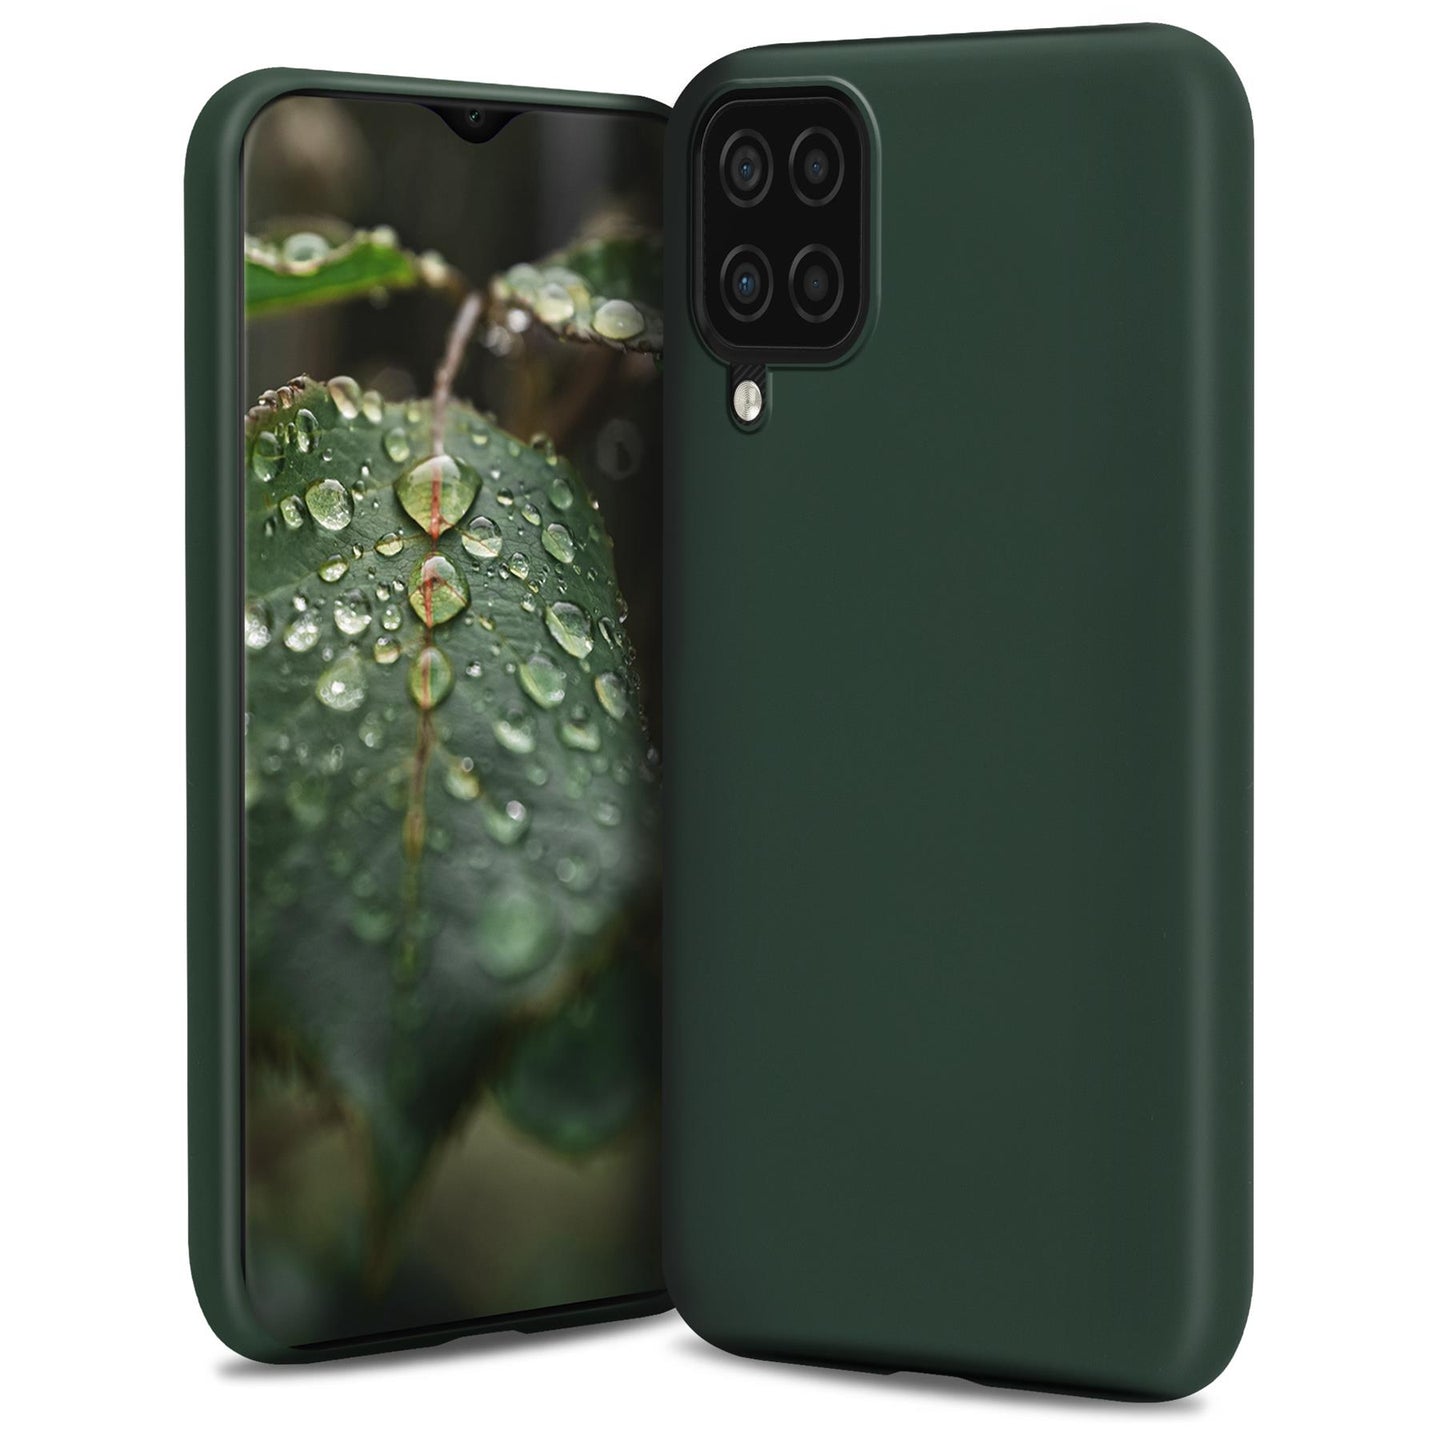 Moozy Lifestyle. Designed for Samsung A12 Case, Dark Green - Liquid Silicone Lightweight Cover with Matte Finish